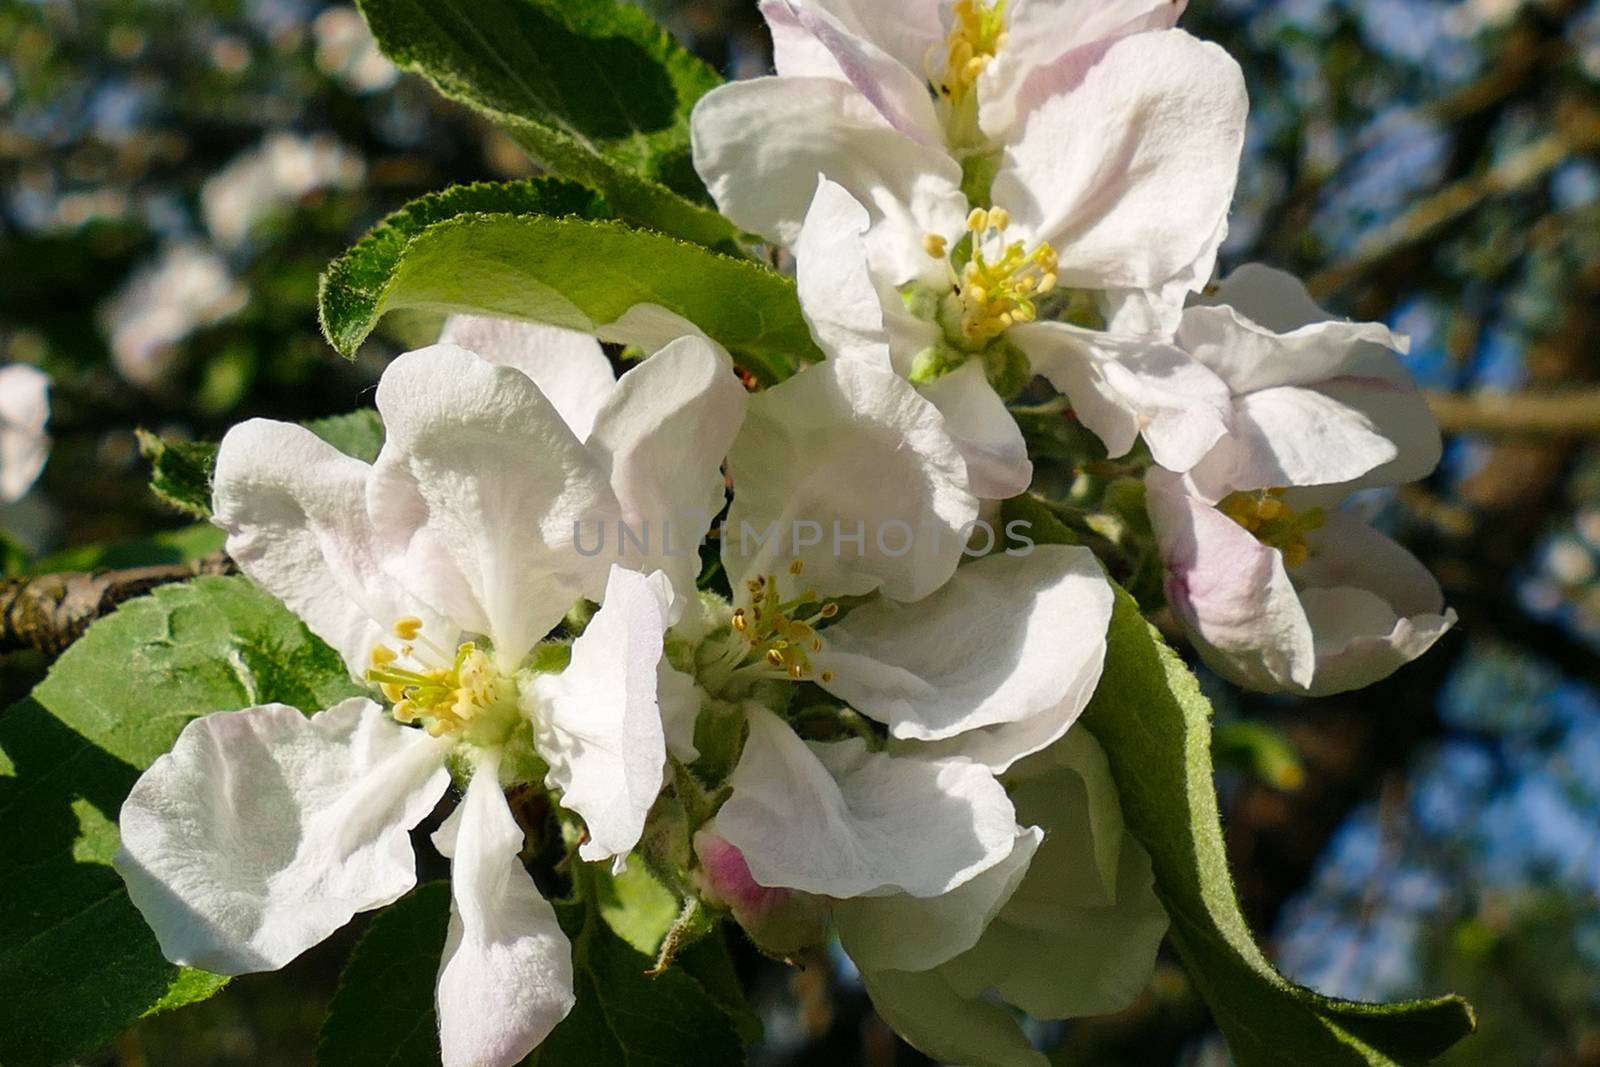 Spring white flowers on an apple tree 2016